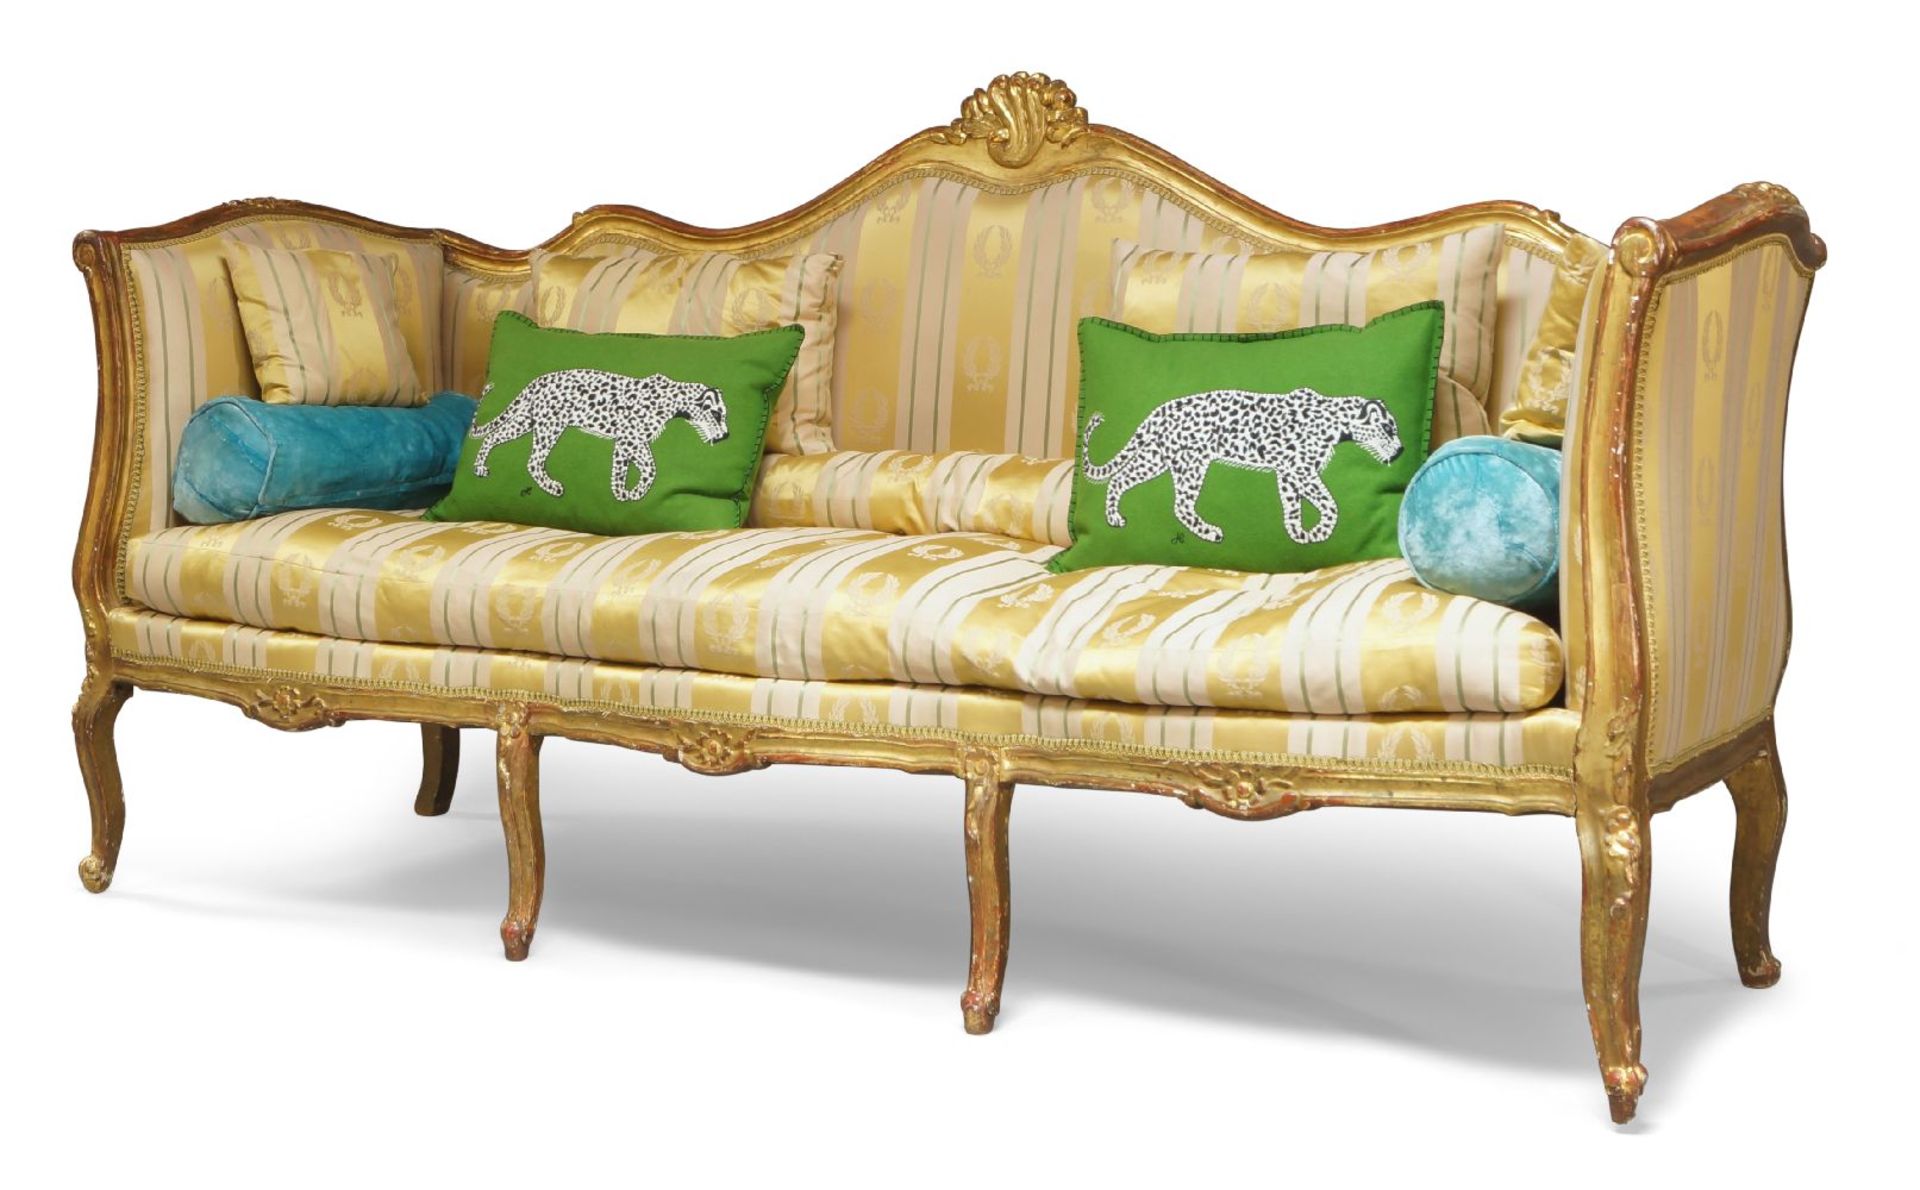 A French giltwood and gesso edged three seater sofa, 19th century, the carved frame with gesso edg